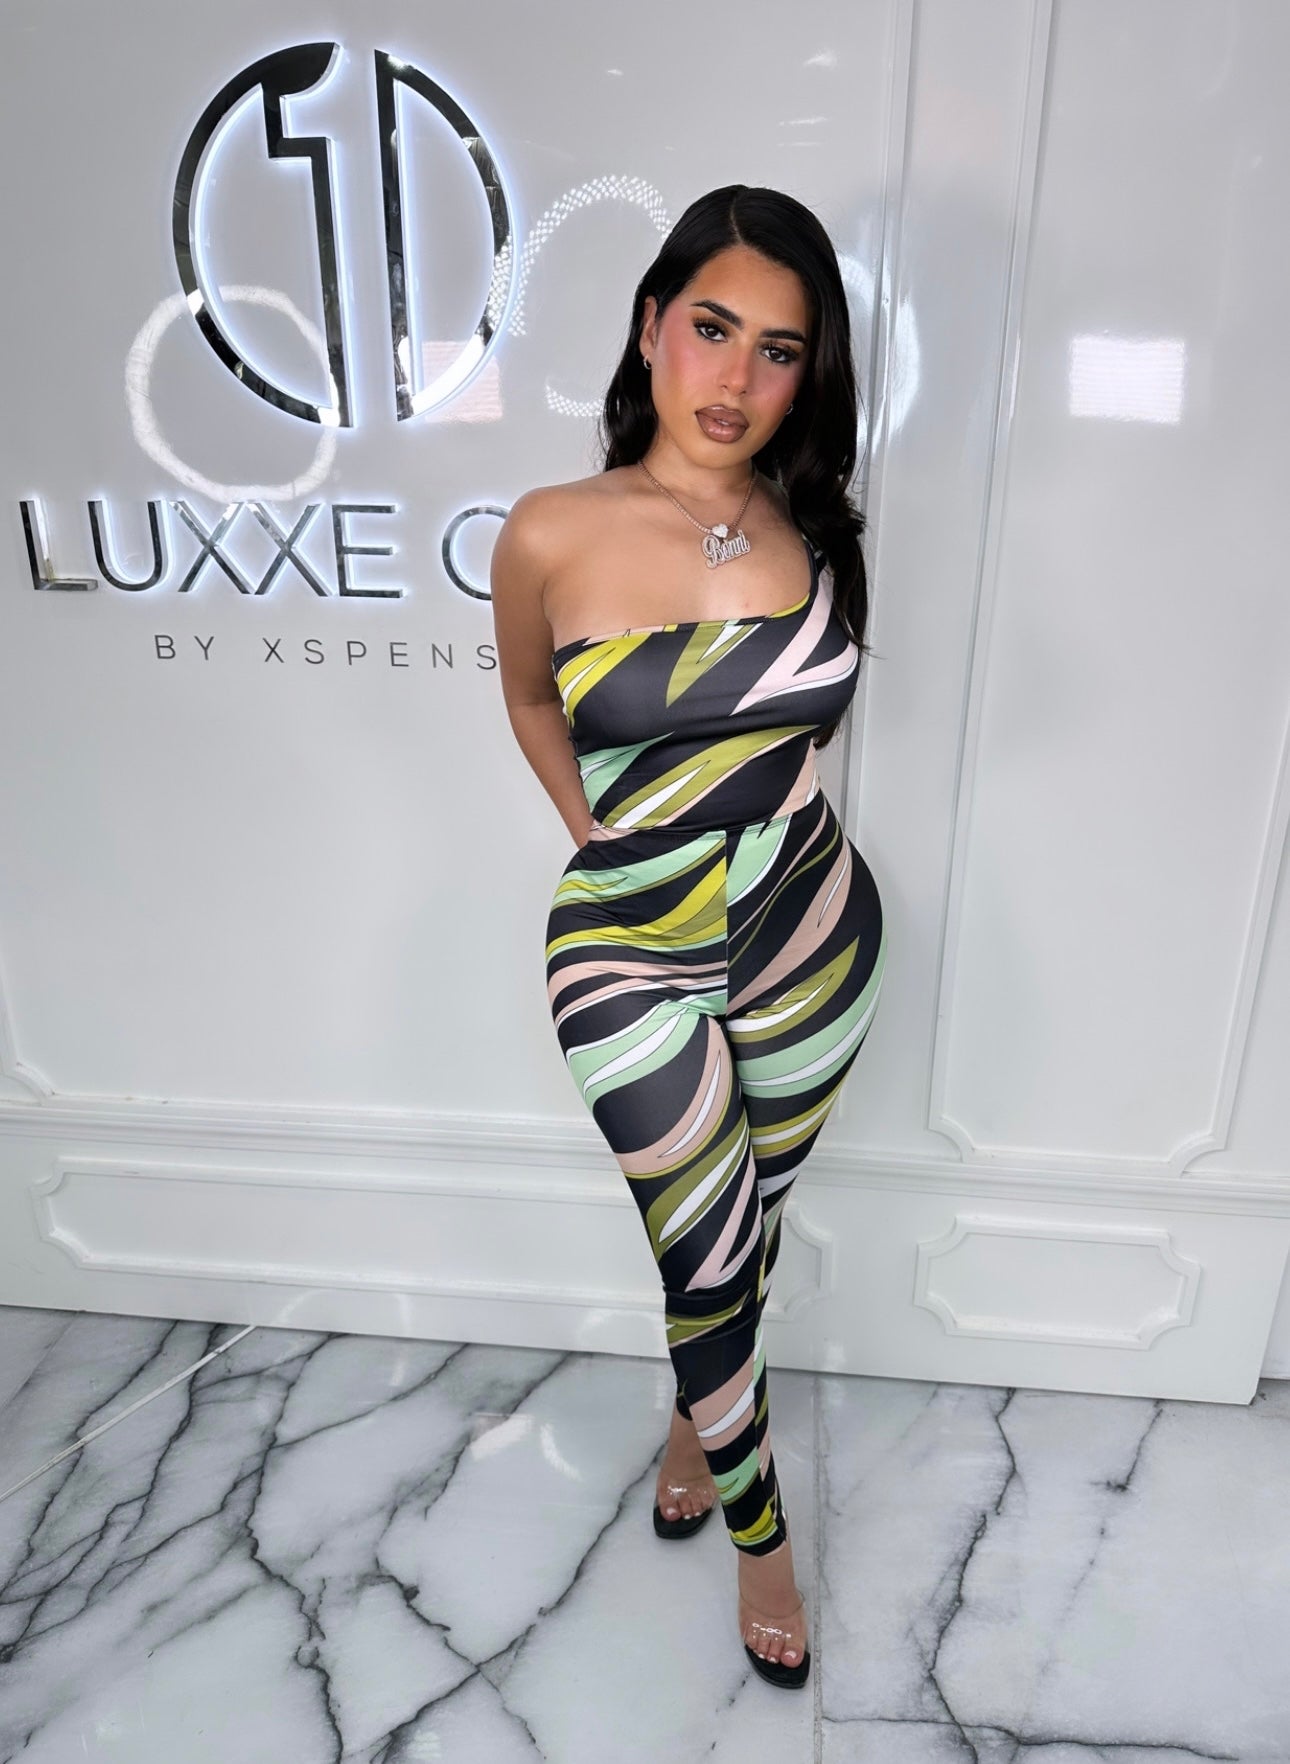 MADE IN PUCCI SET - Luxxe One